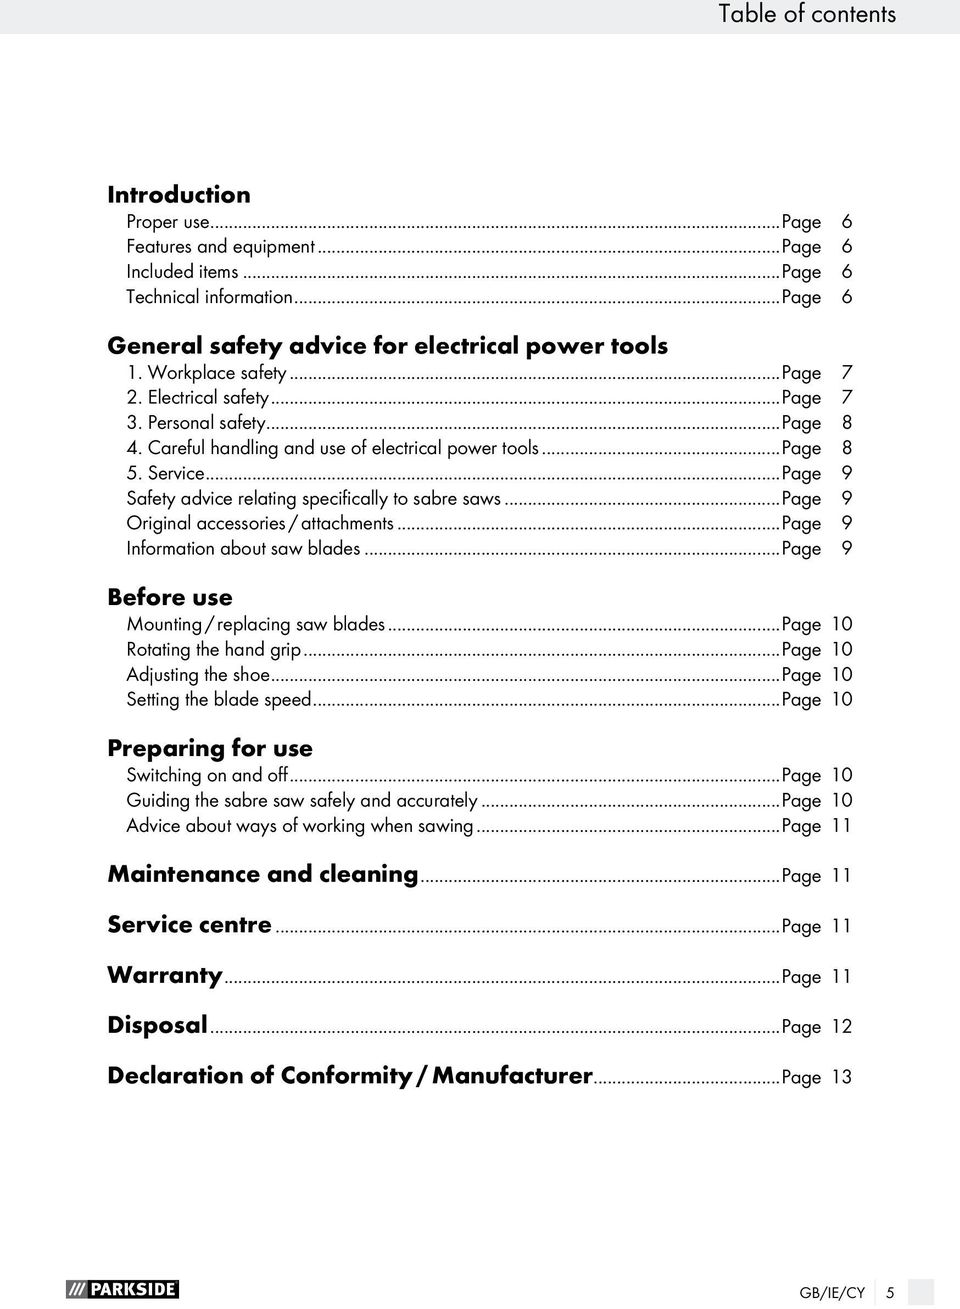 ..Page 9 Safety advice relating specifically to sabre saws...page 9 Original accessories / attachments...page 9 Information about saw blades...page 9 Before use Mounting / replacing saw blades.